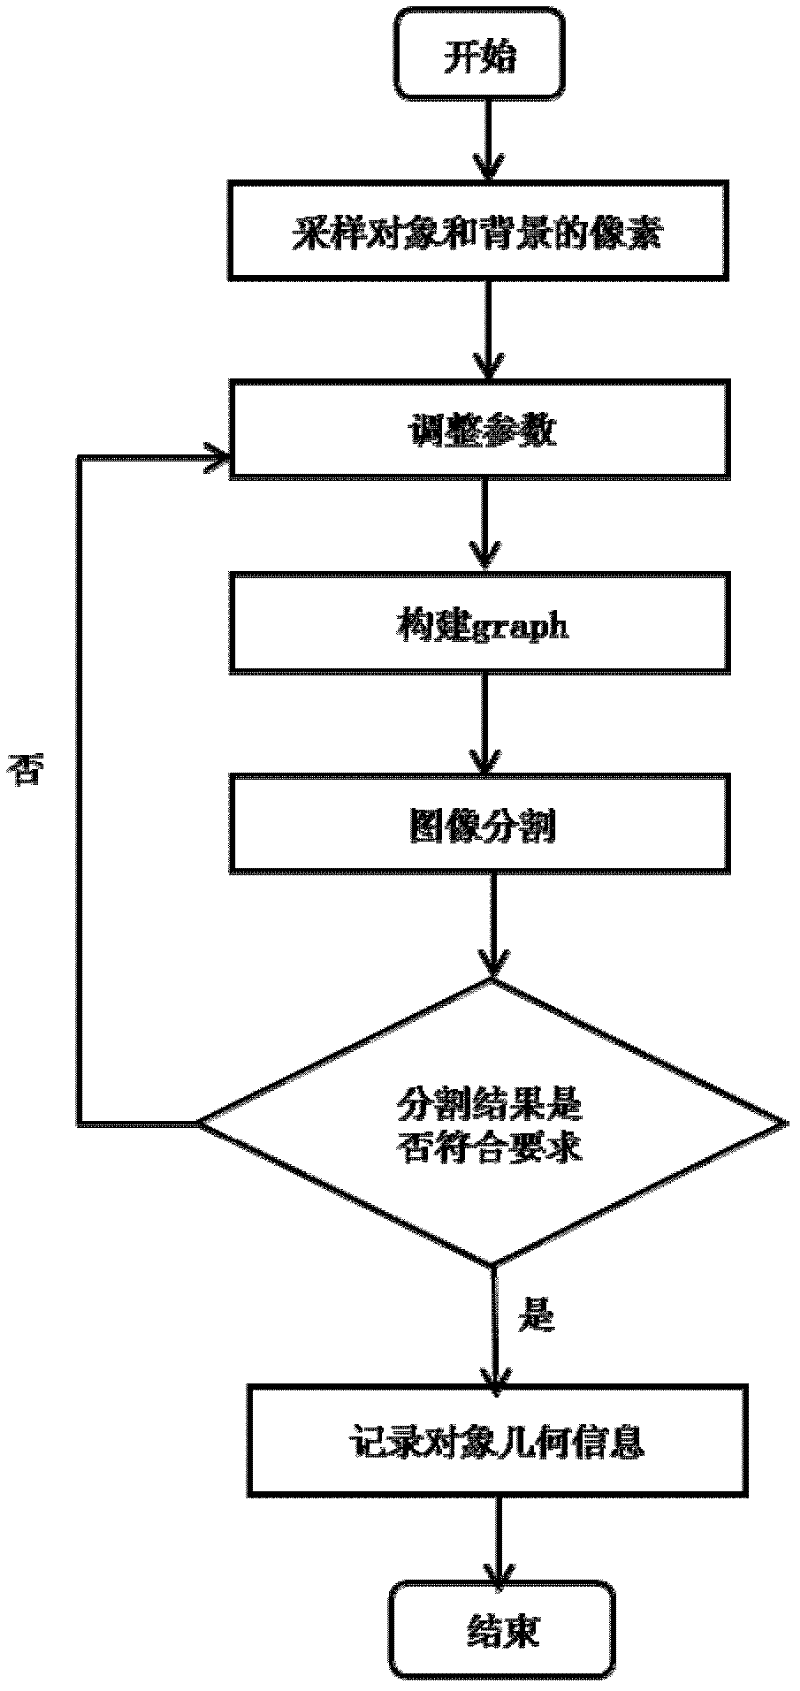 Binocular image and object contour-based virtual and actual sheltering treatment method